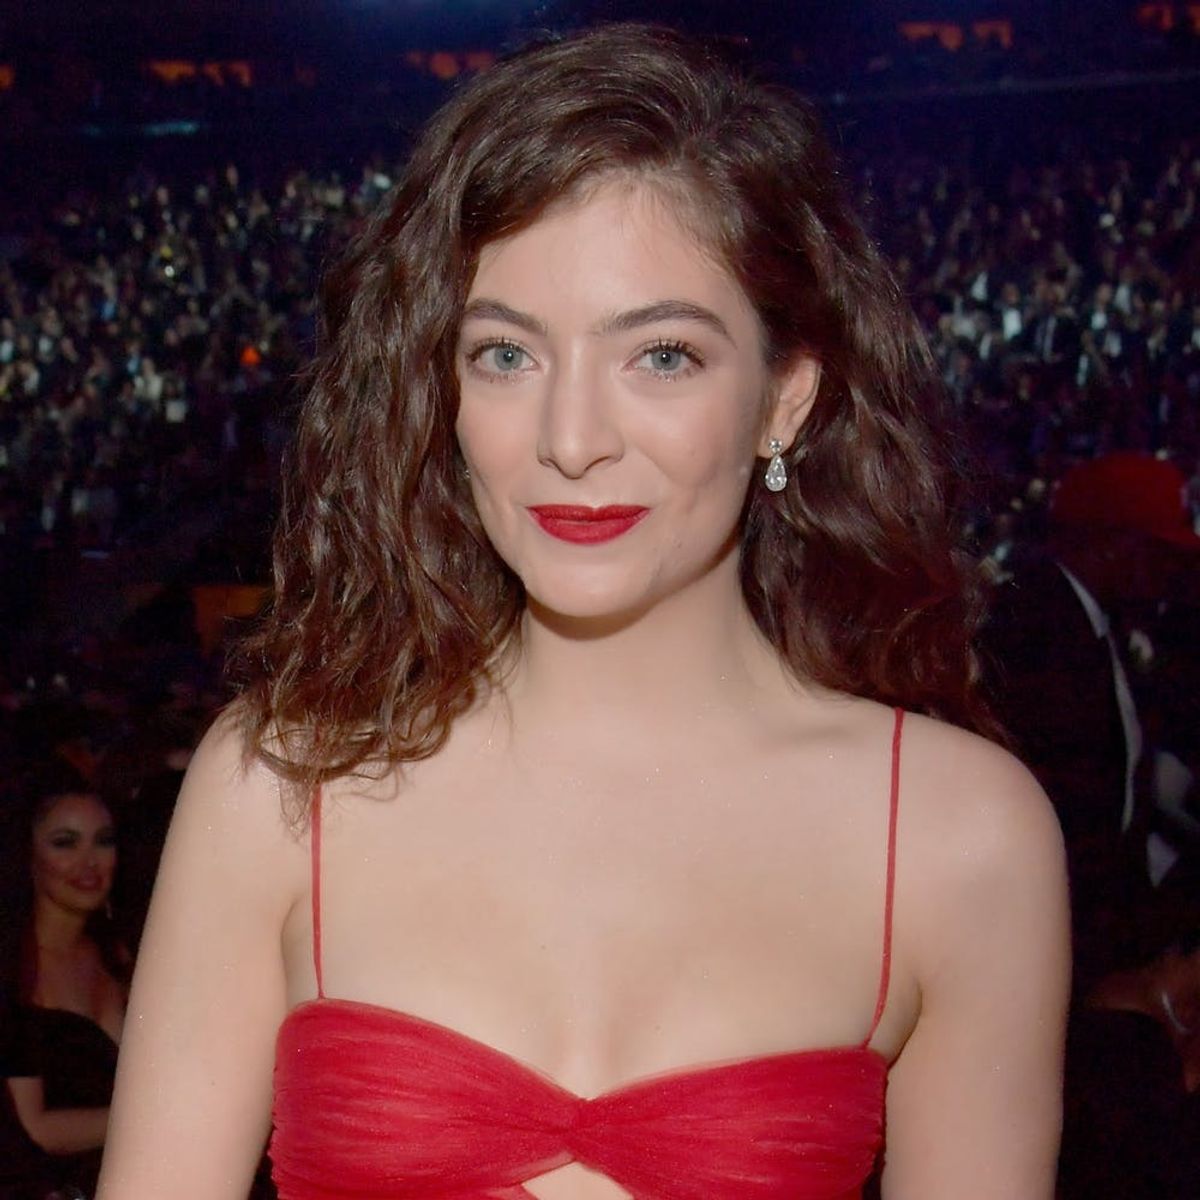 Lorde Took Out a Full-Page Newspaper Ad to Share Her Thoughts on the Grammys